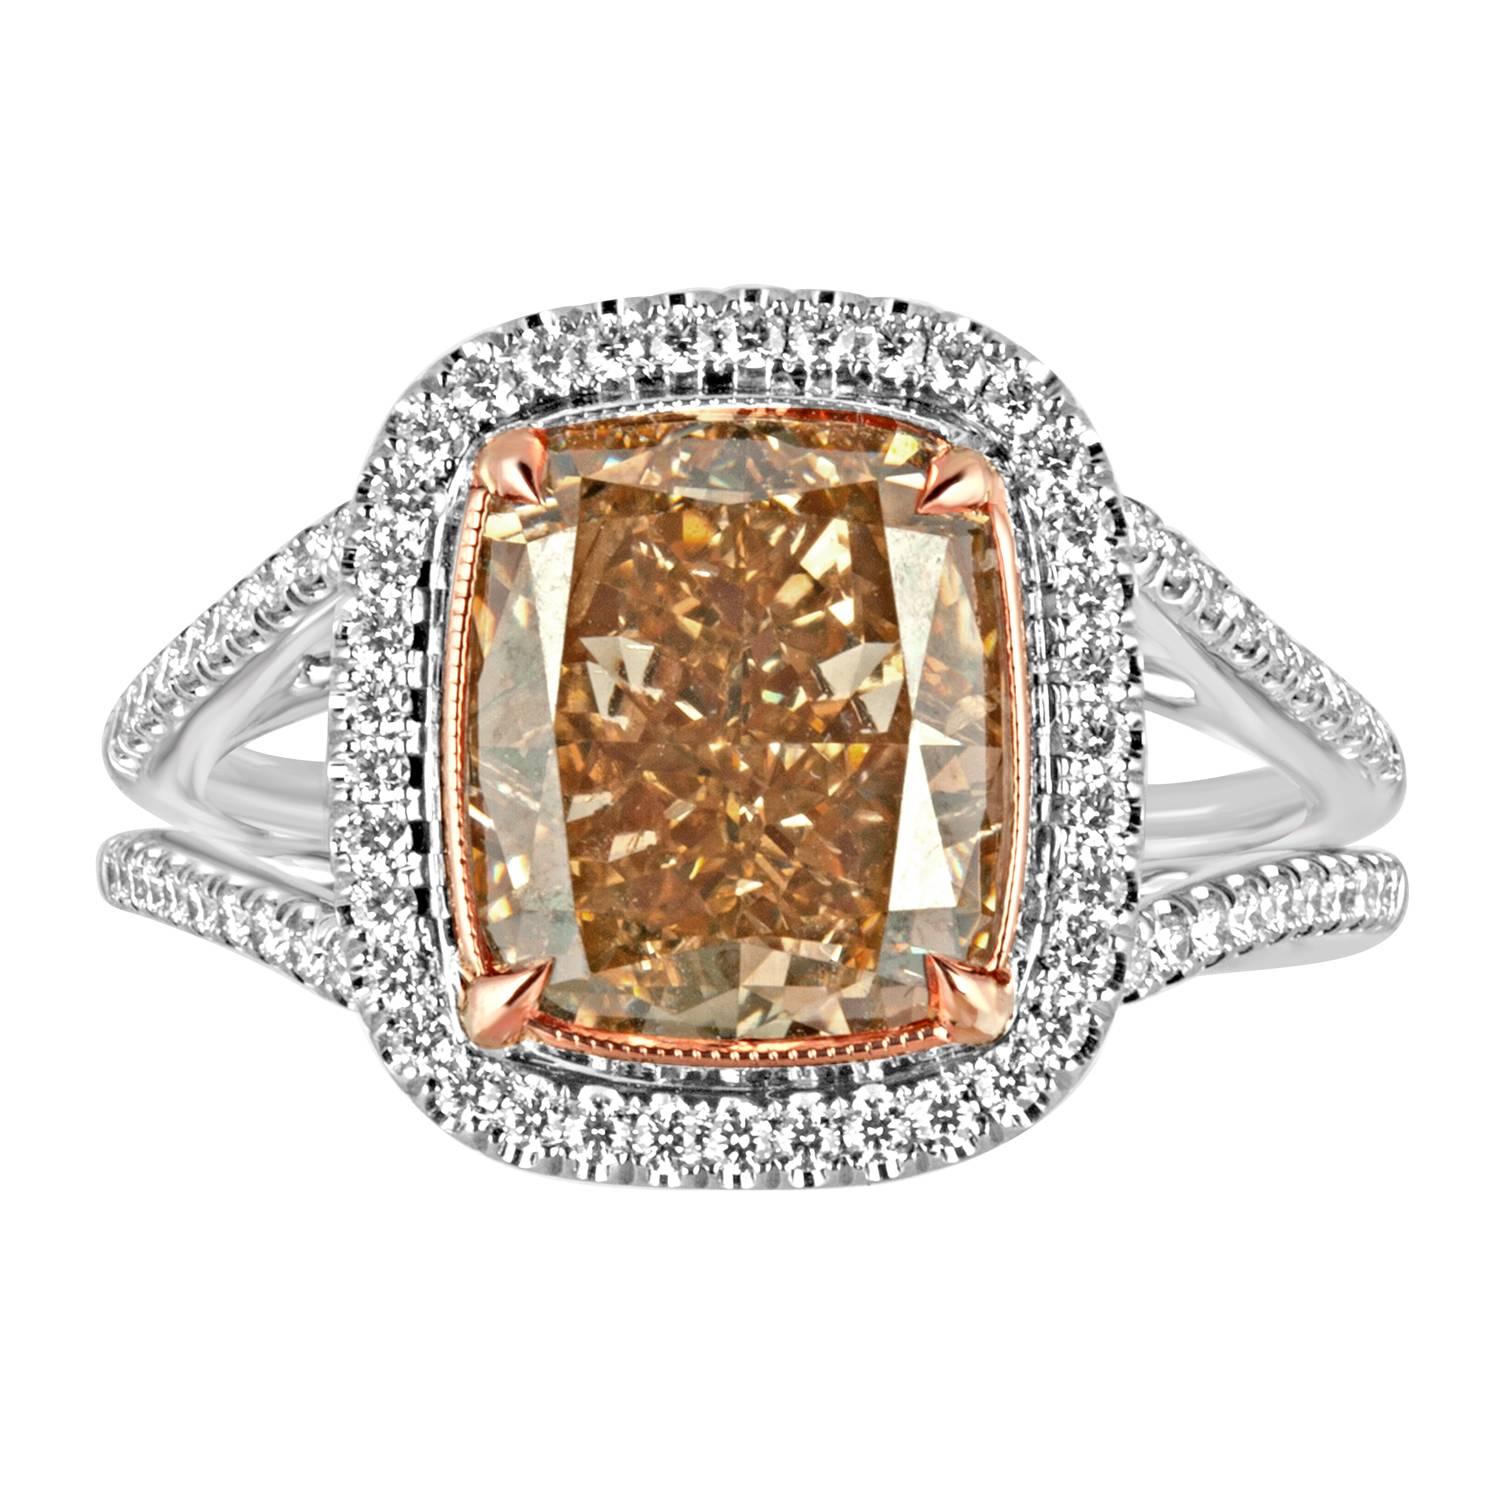 Fancy Deep Brown Orange Cushion Cut Diamond Set in Two-Color Gold Ring Mounting For Sale